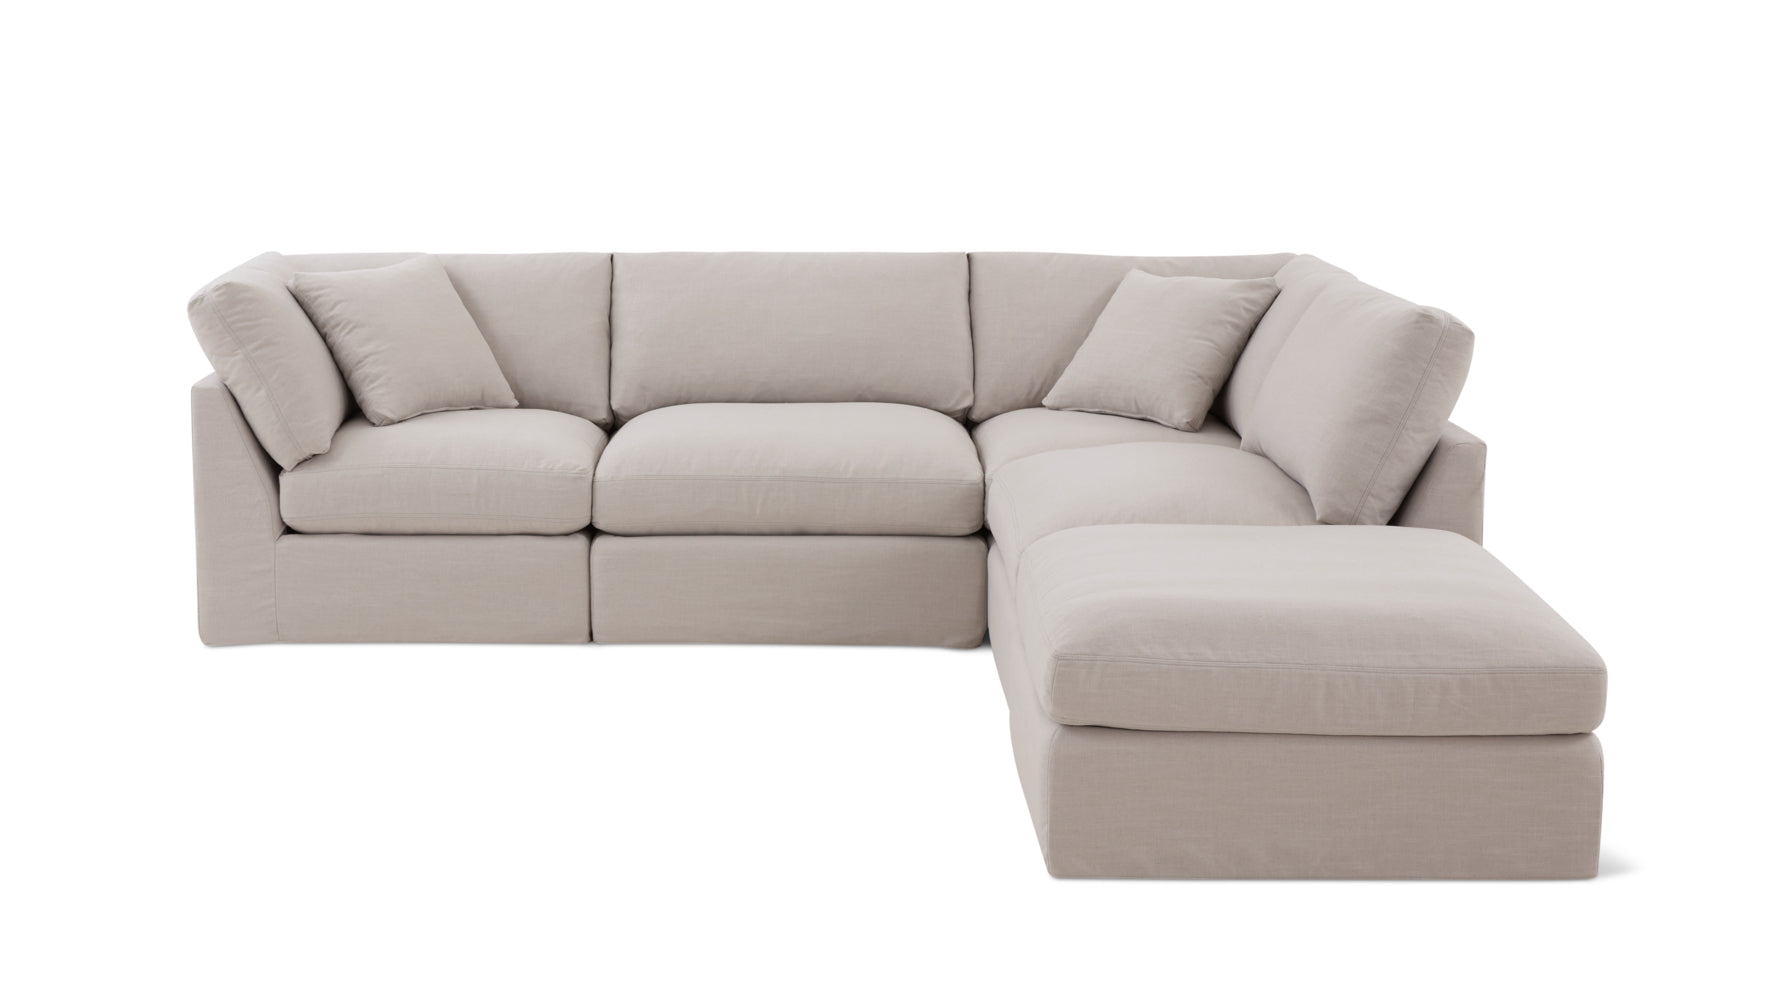 Get Together™ 5-Piece Modular Sectional, Standard, Clay - Image 1